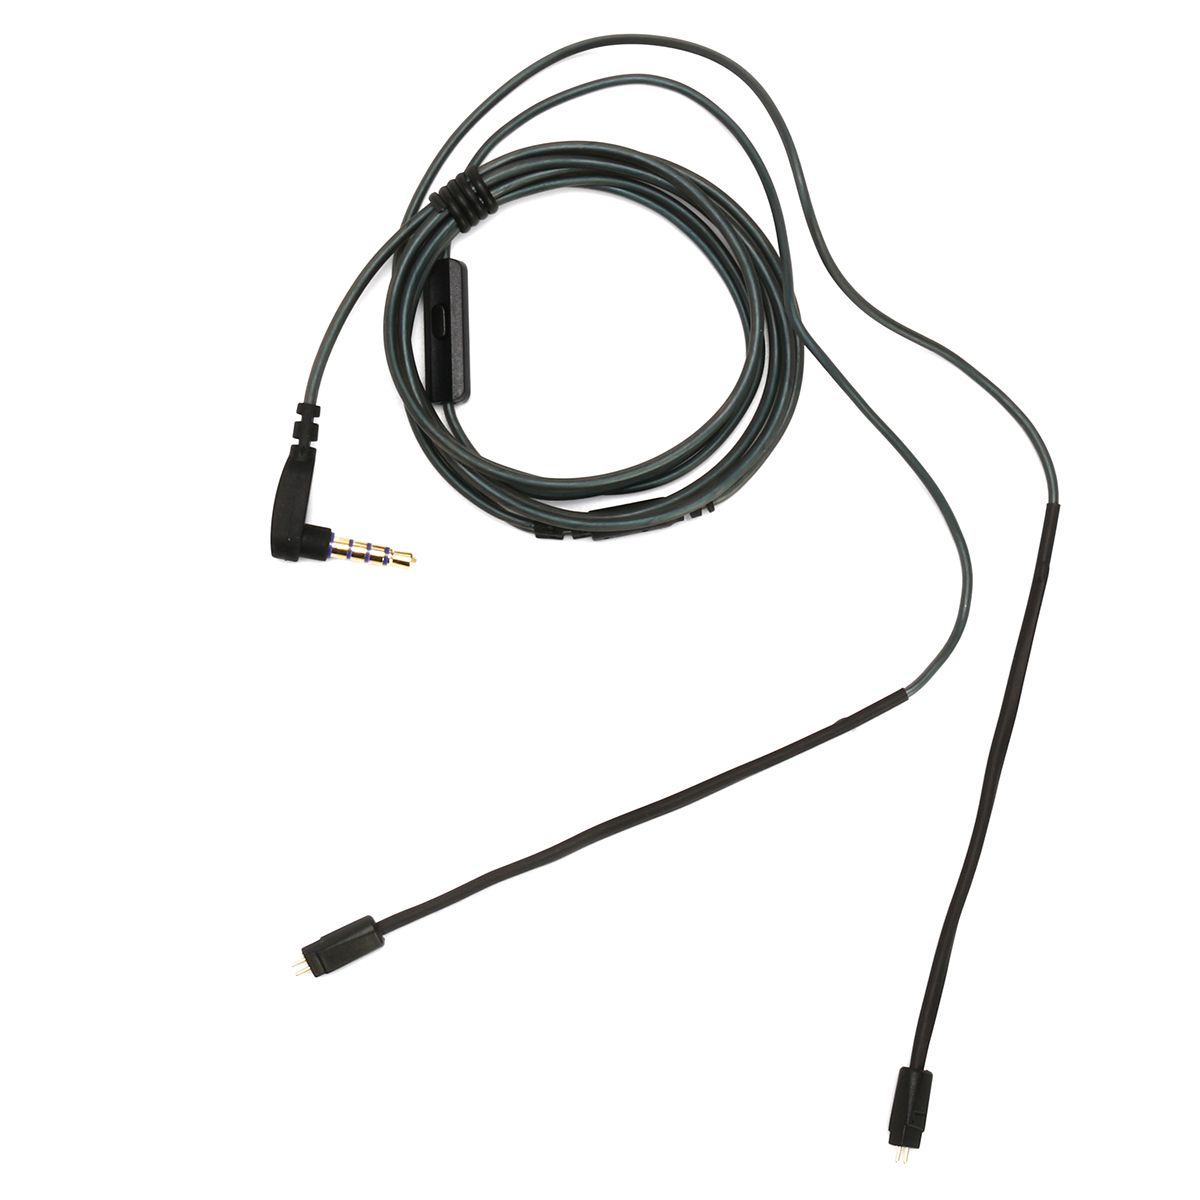 Replacement-075mm-12M-Upgraded-Plated-Audio-Cable-Earphone-Headphone-Cable-for-KZ-ZS3-1408546